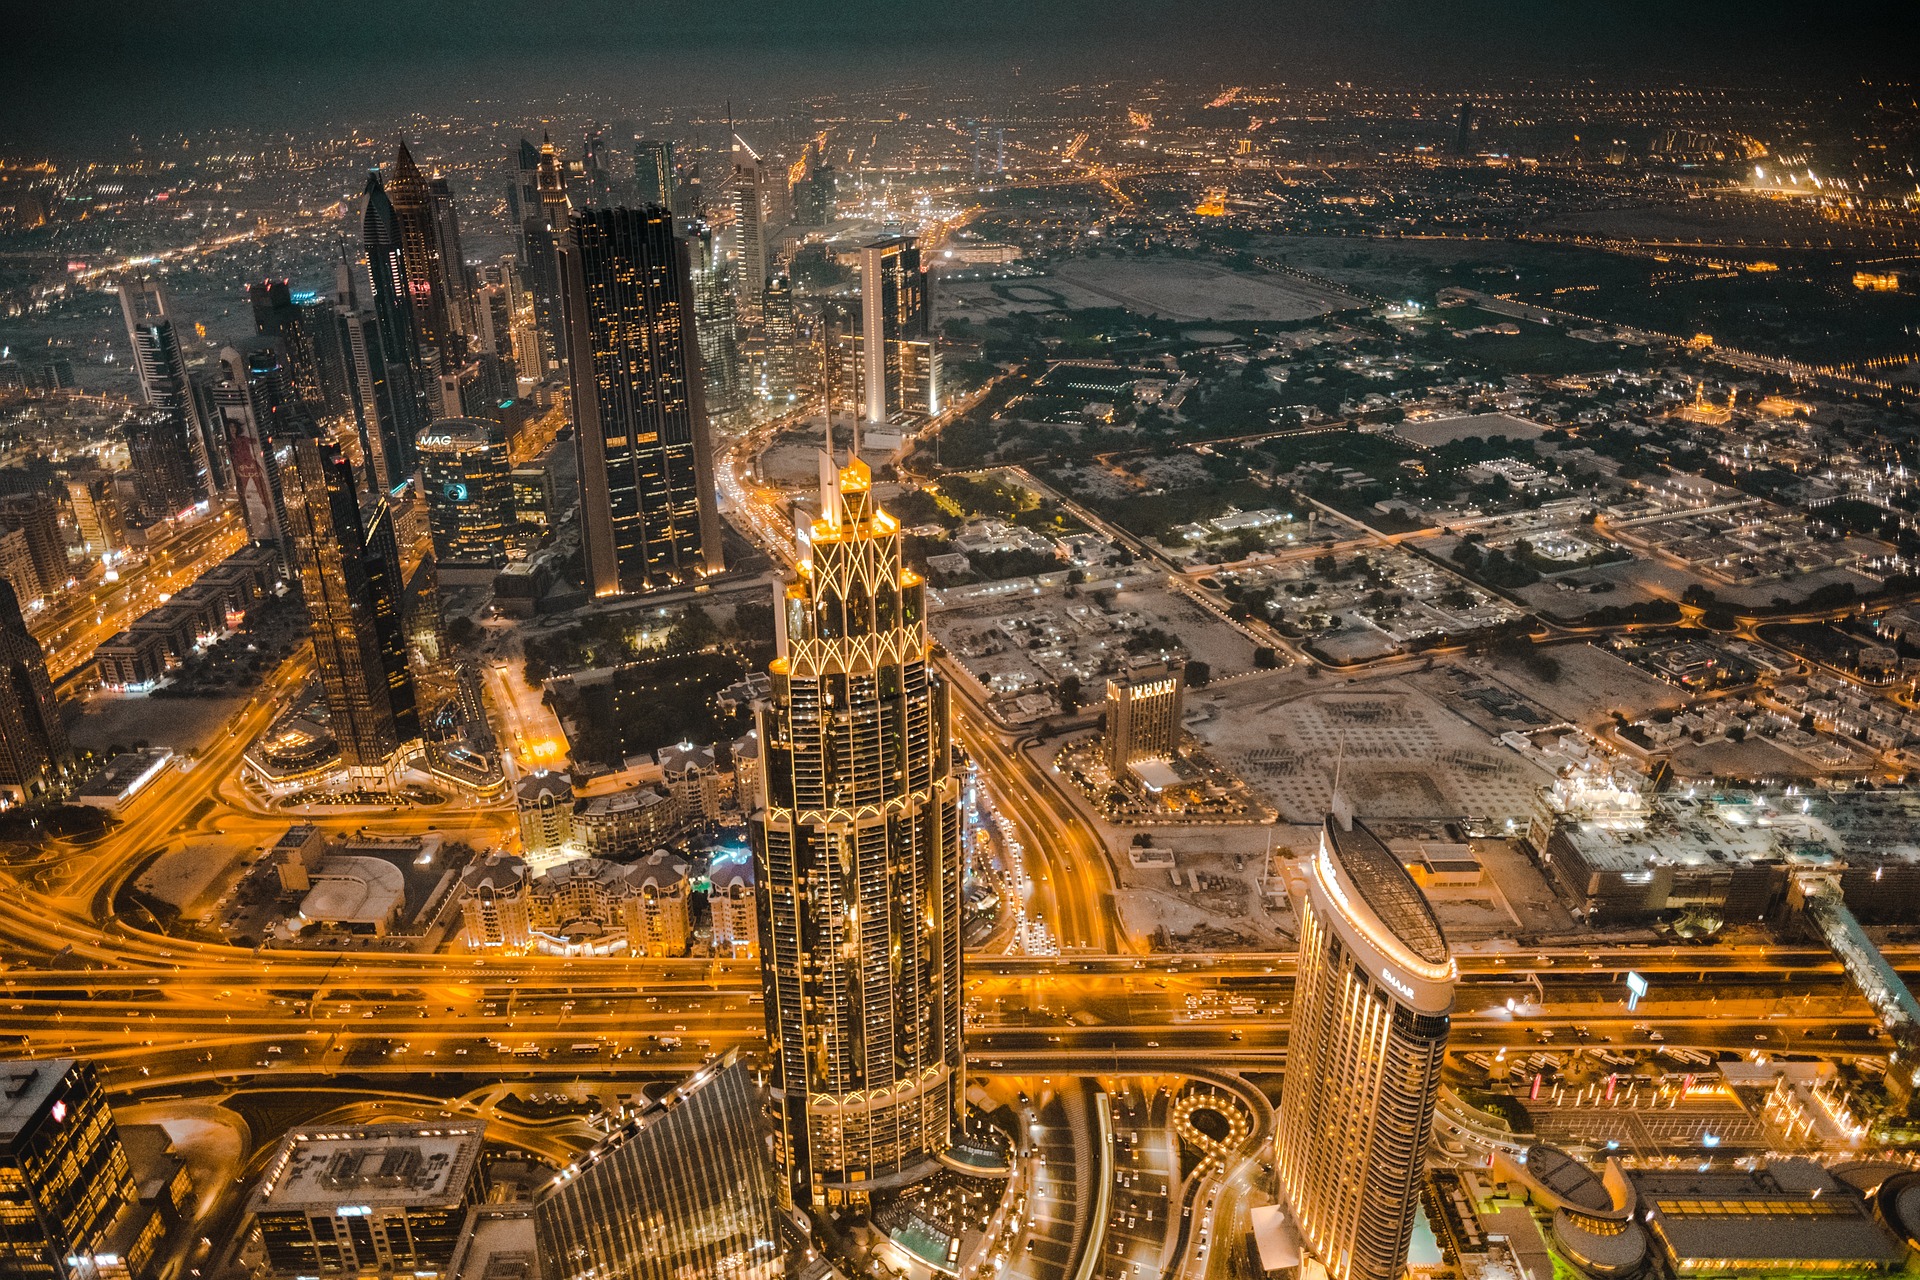 Where can I Buy Property in Dubai? In Which Area?